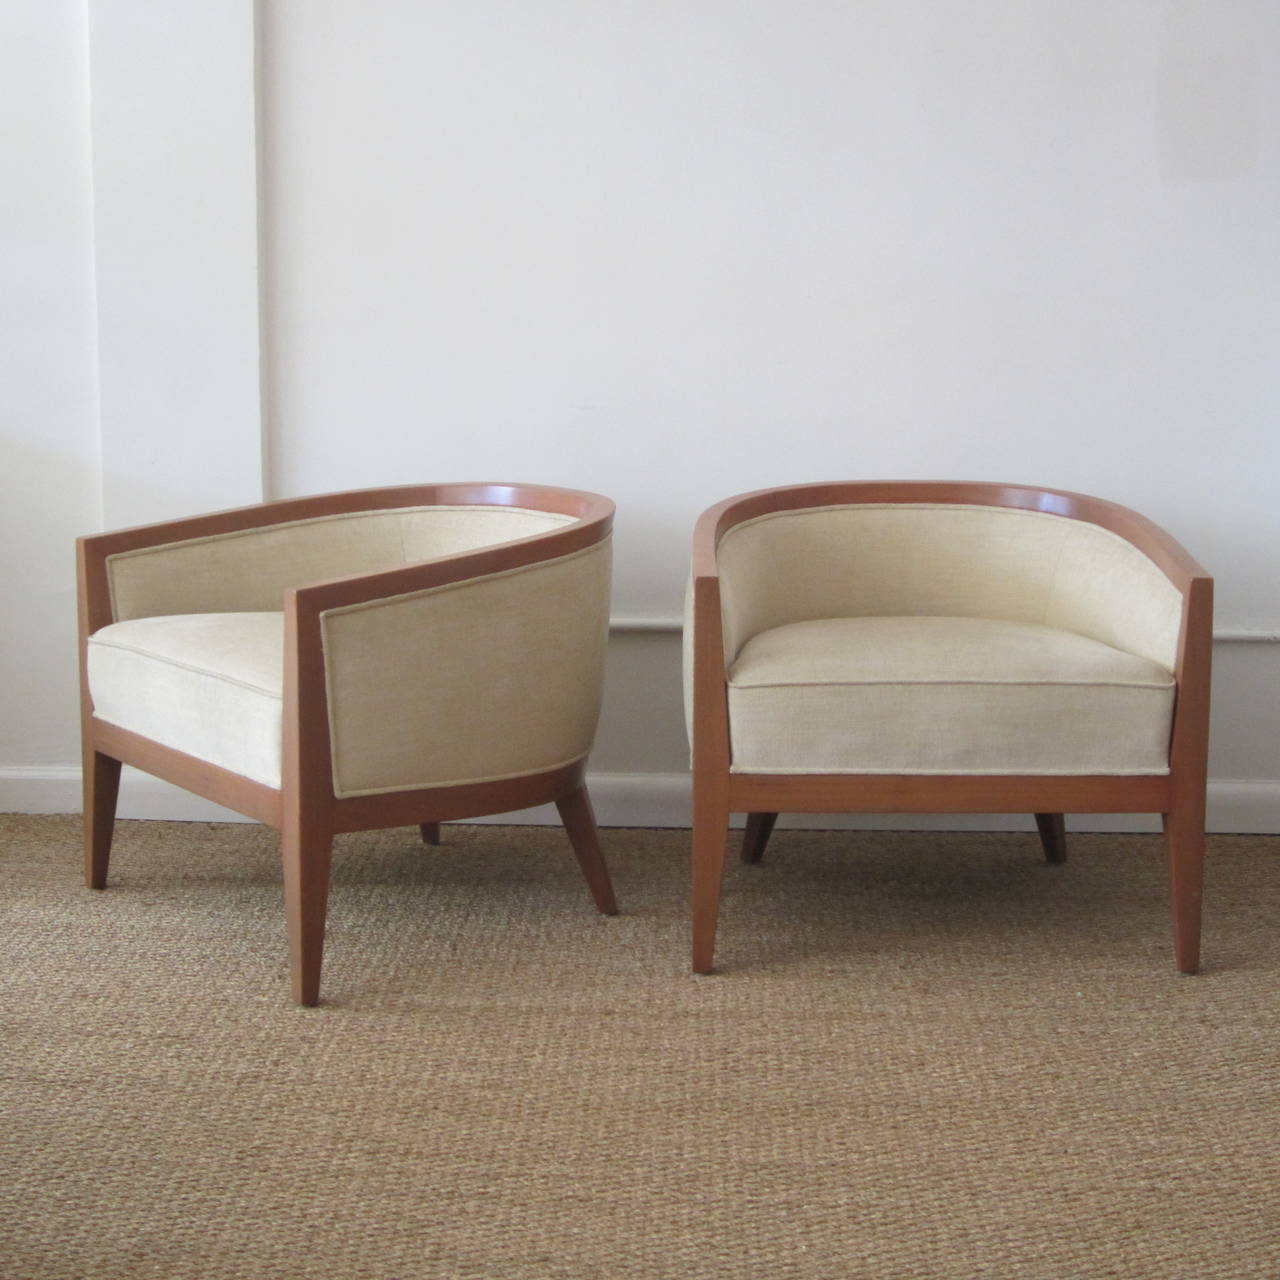 Pair of curved wood frame armchairs newly upholstered with matching small lumbar cushions included, not shown. Wood is finished. Sold as a pair.